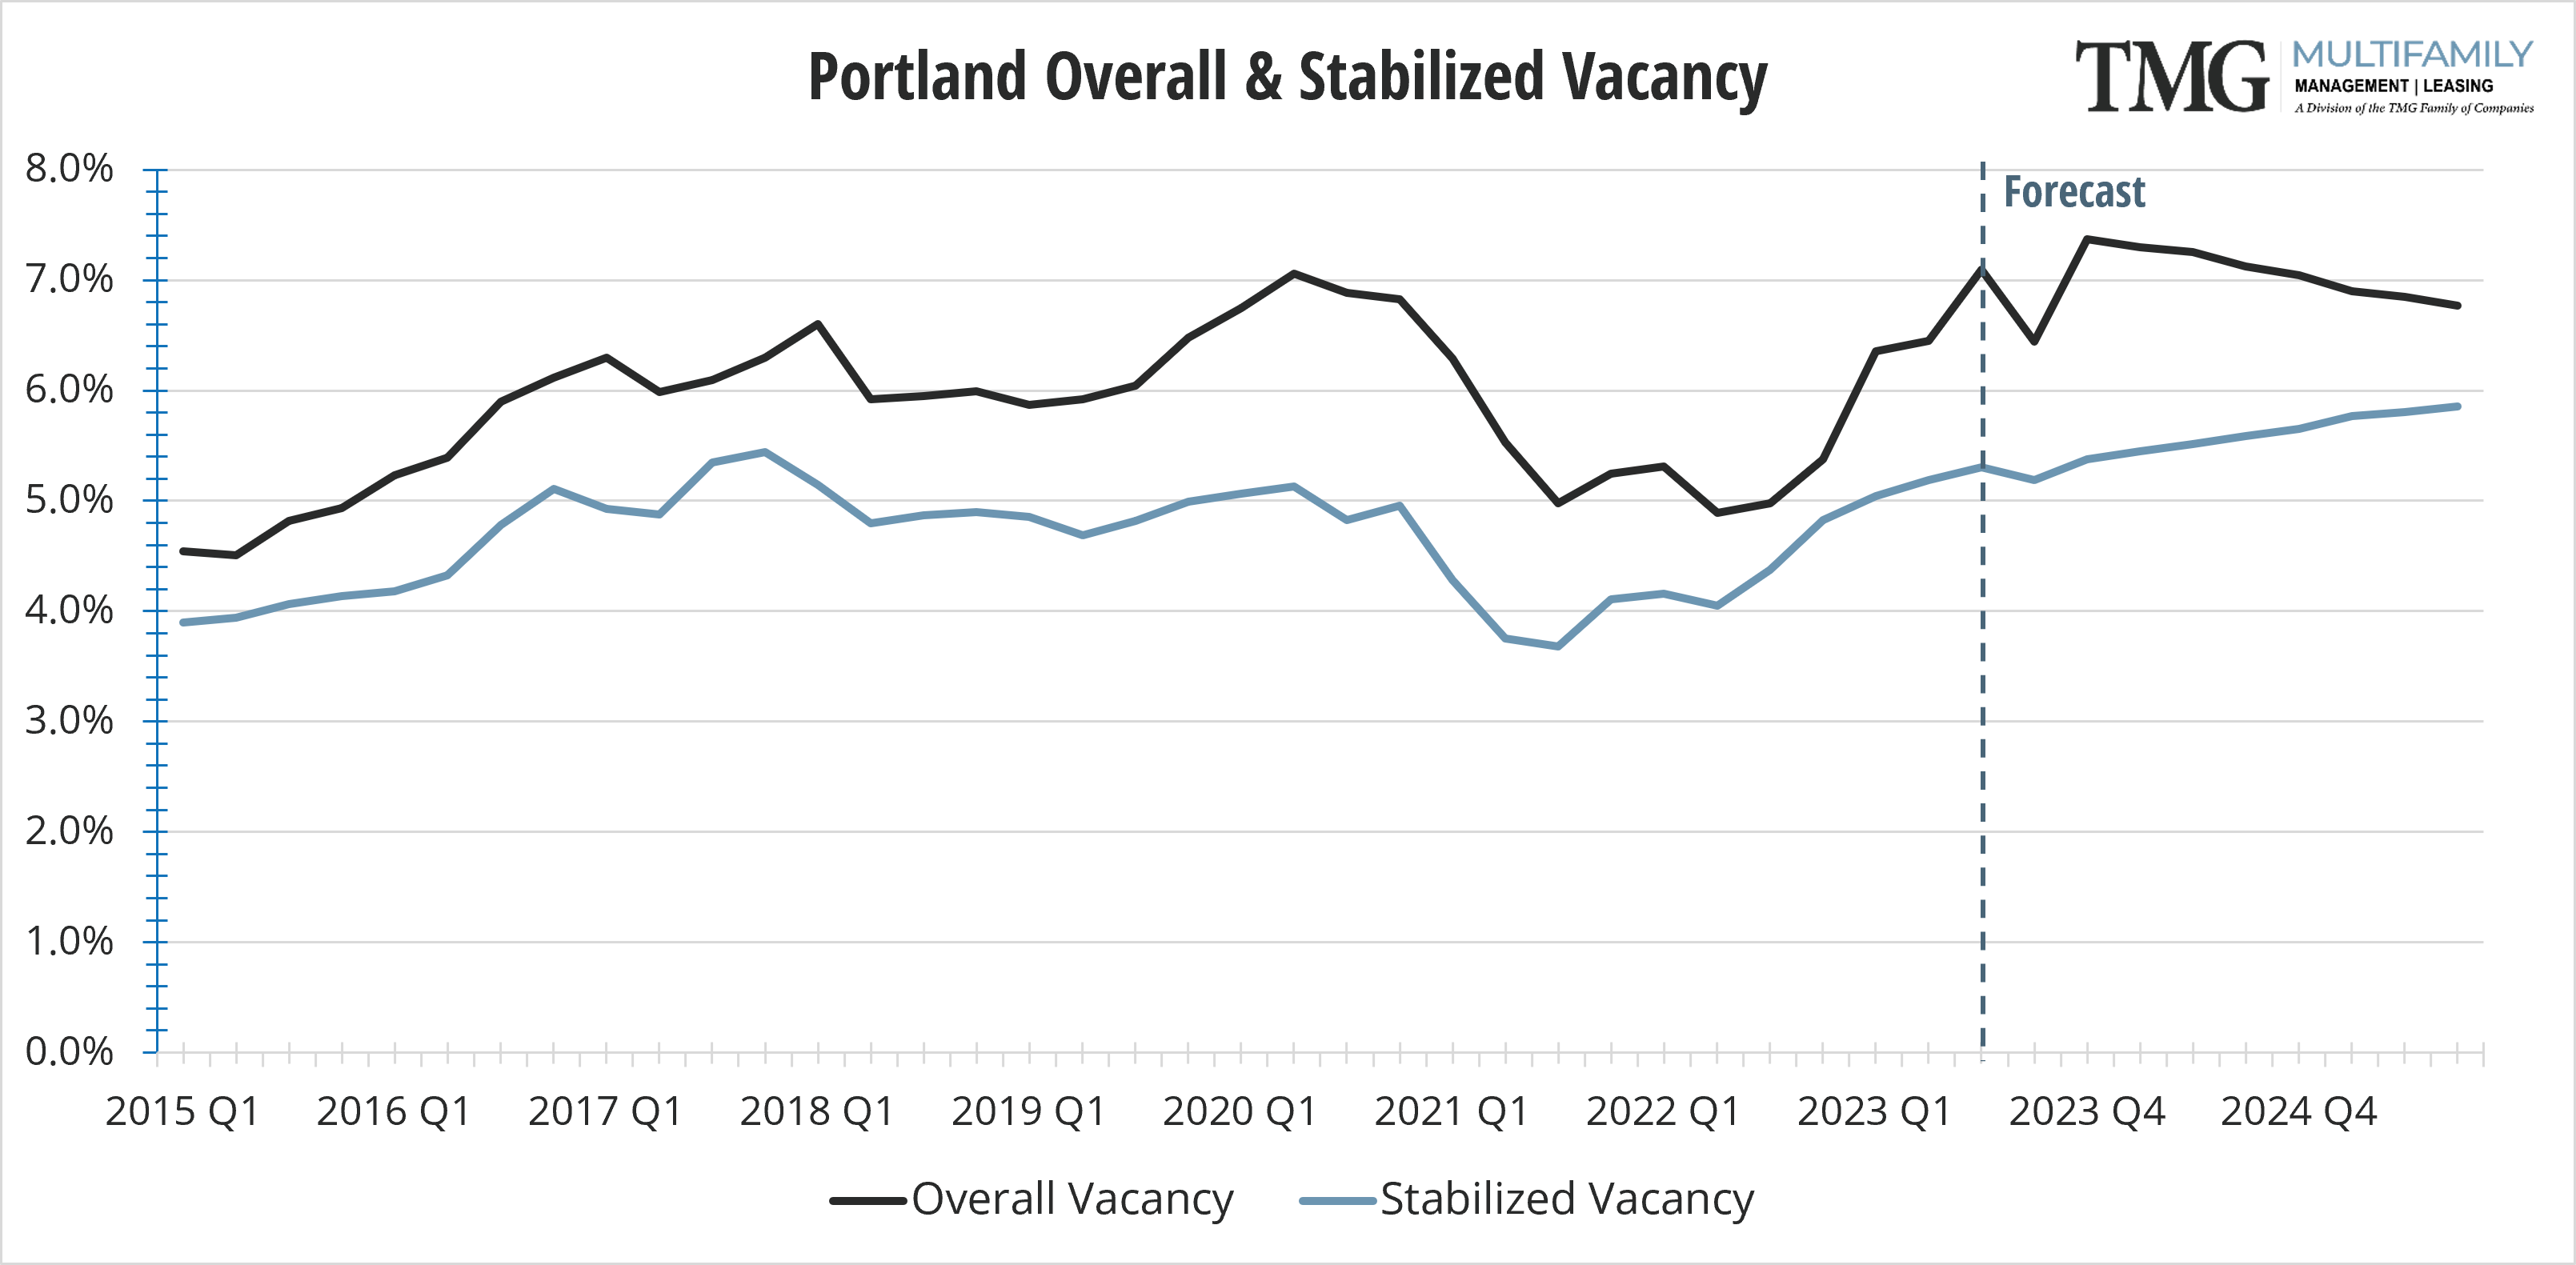 PDX Overall and Stabilized Vacancy